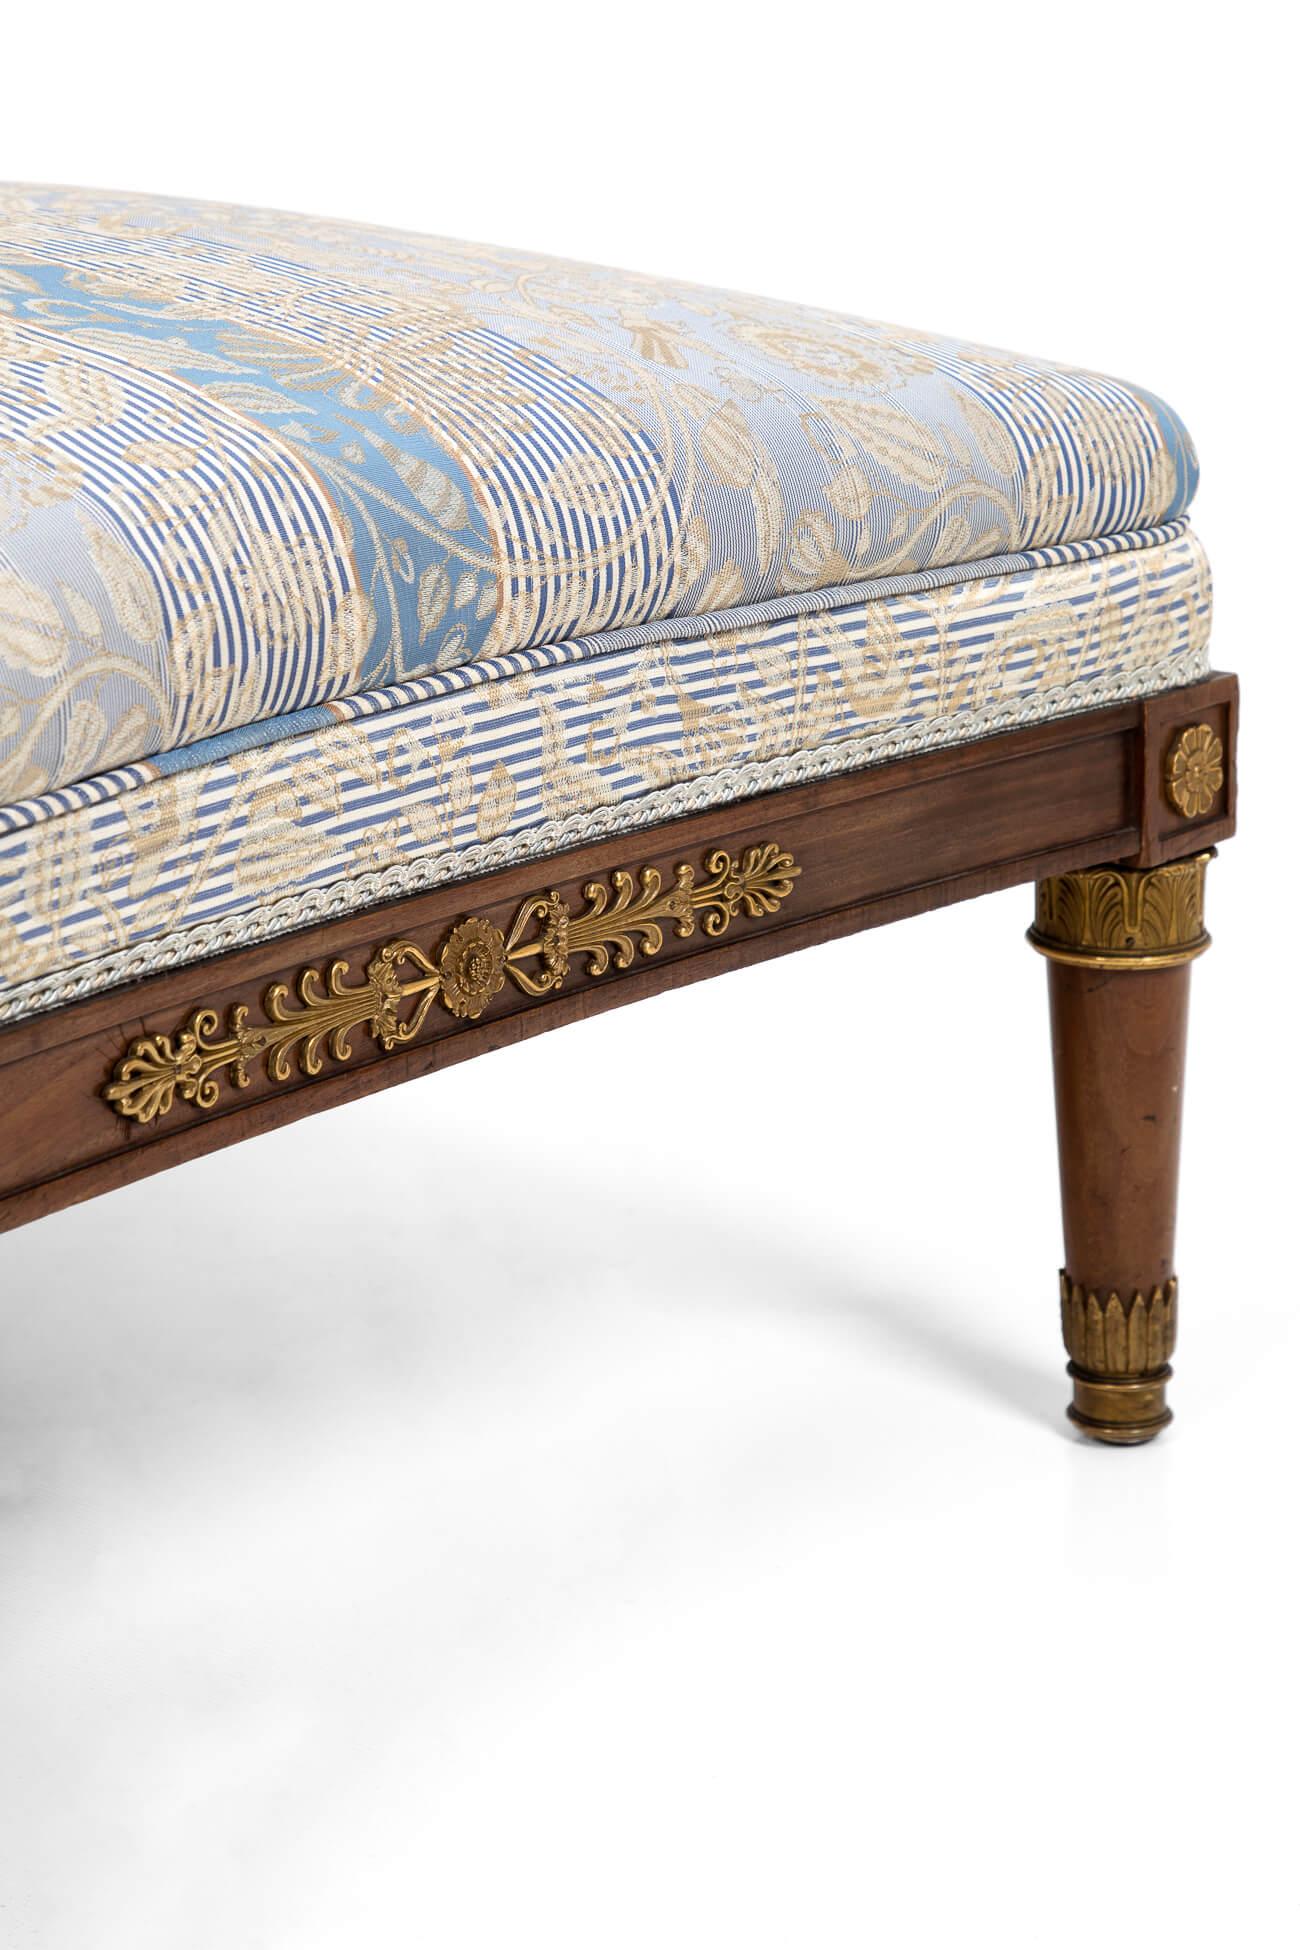 19th Century French Mahogany Footstool, circa 1850 In Good Condition For Sale In Faversham, GB